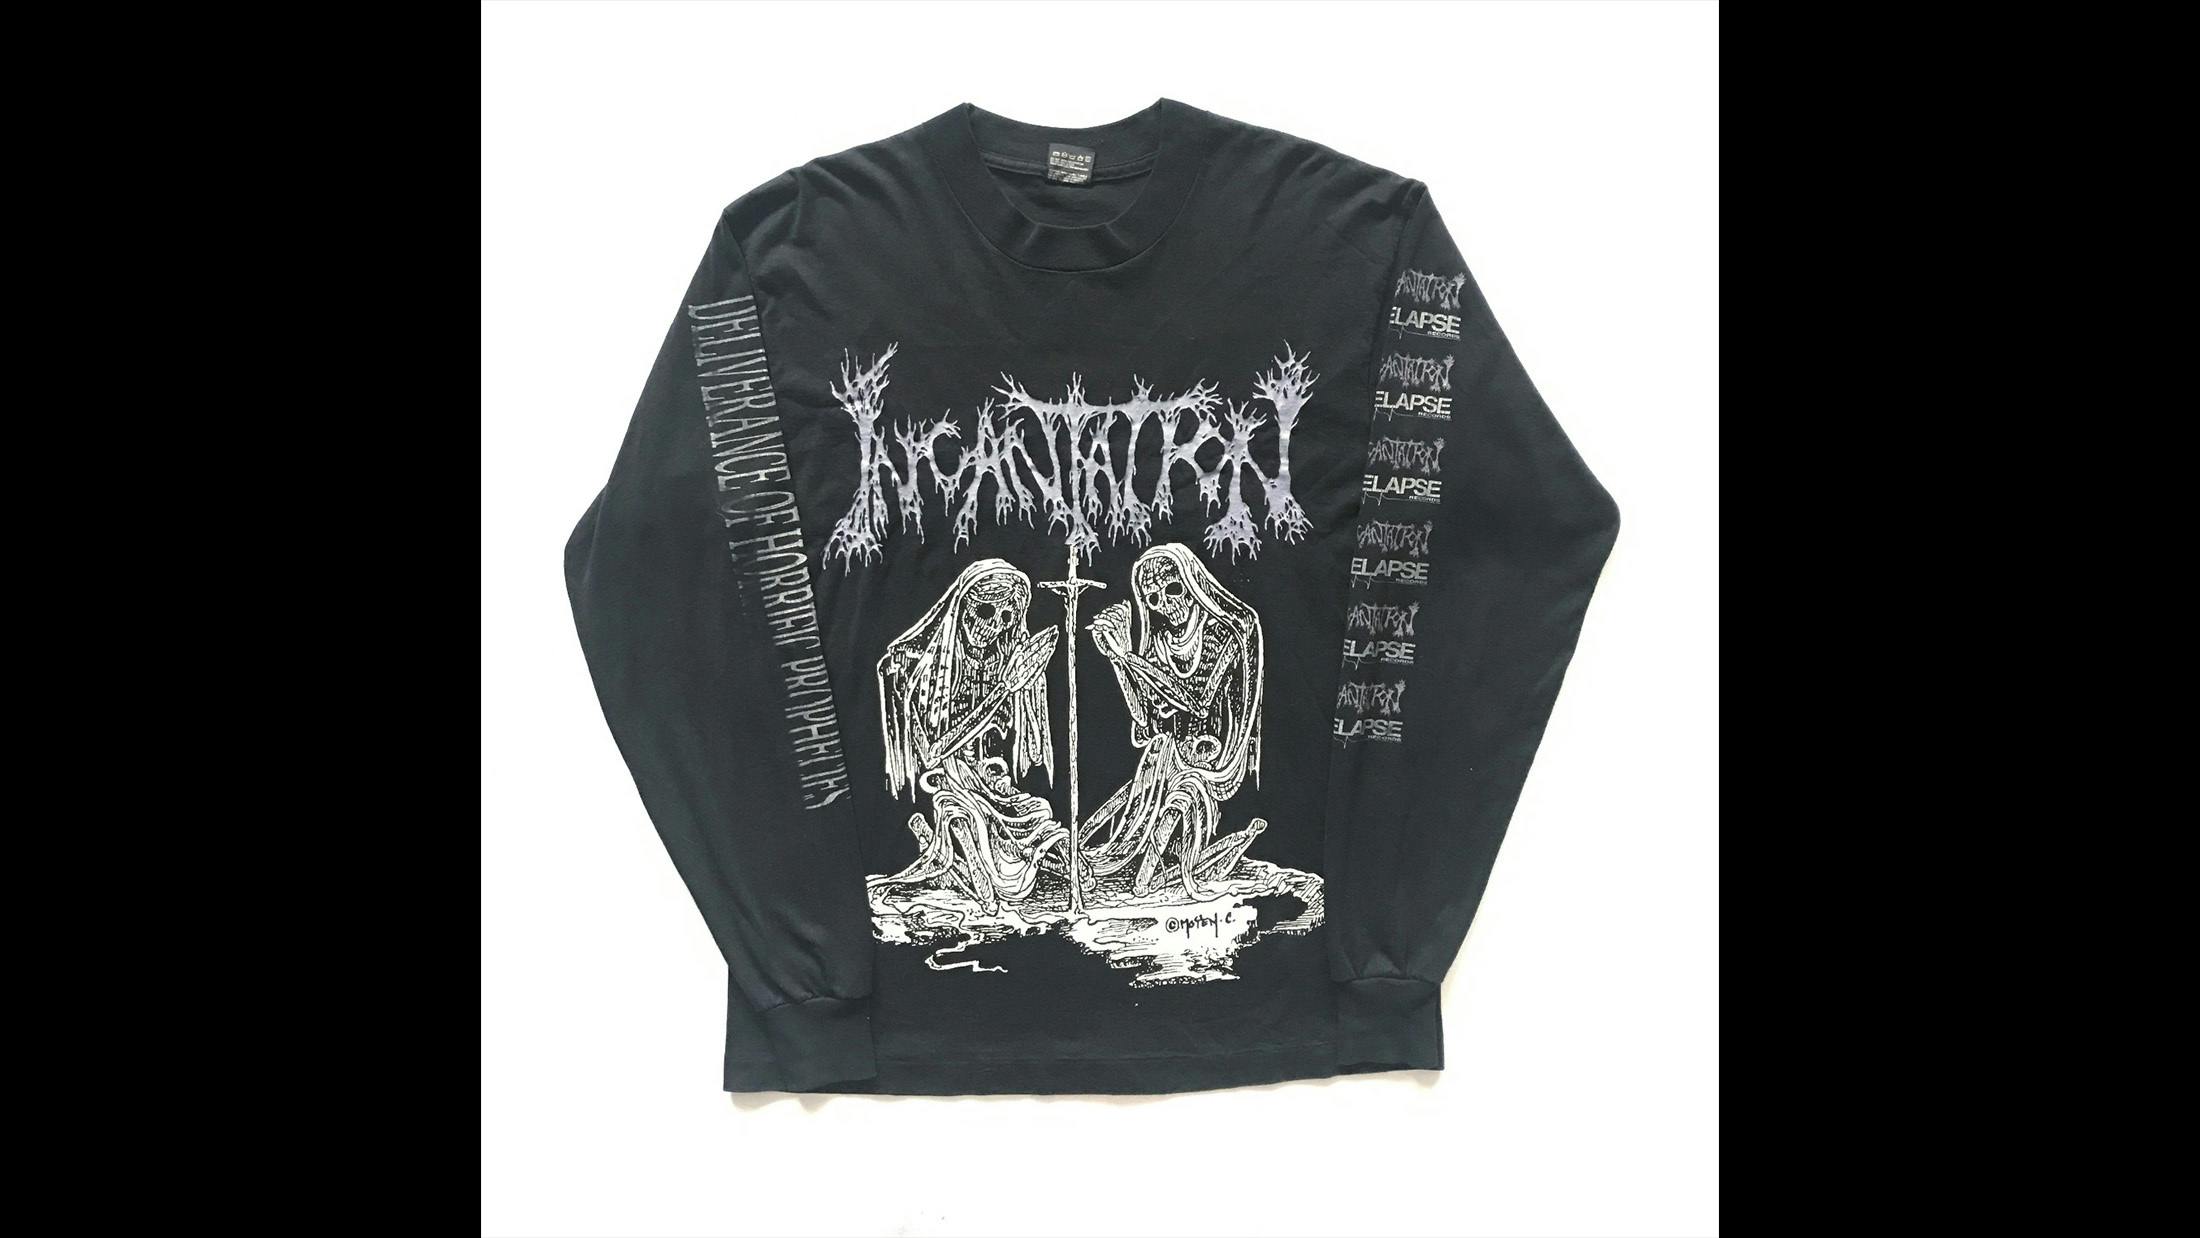 '93 Relapse Records long sleeve for the single ‘Deliverance of Horrific Prophecies’ from the debut album 'Onward to Golgotha'.